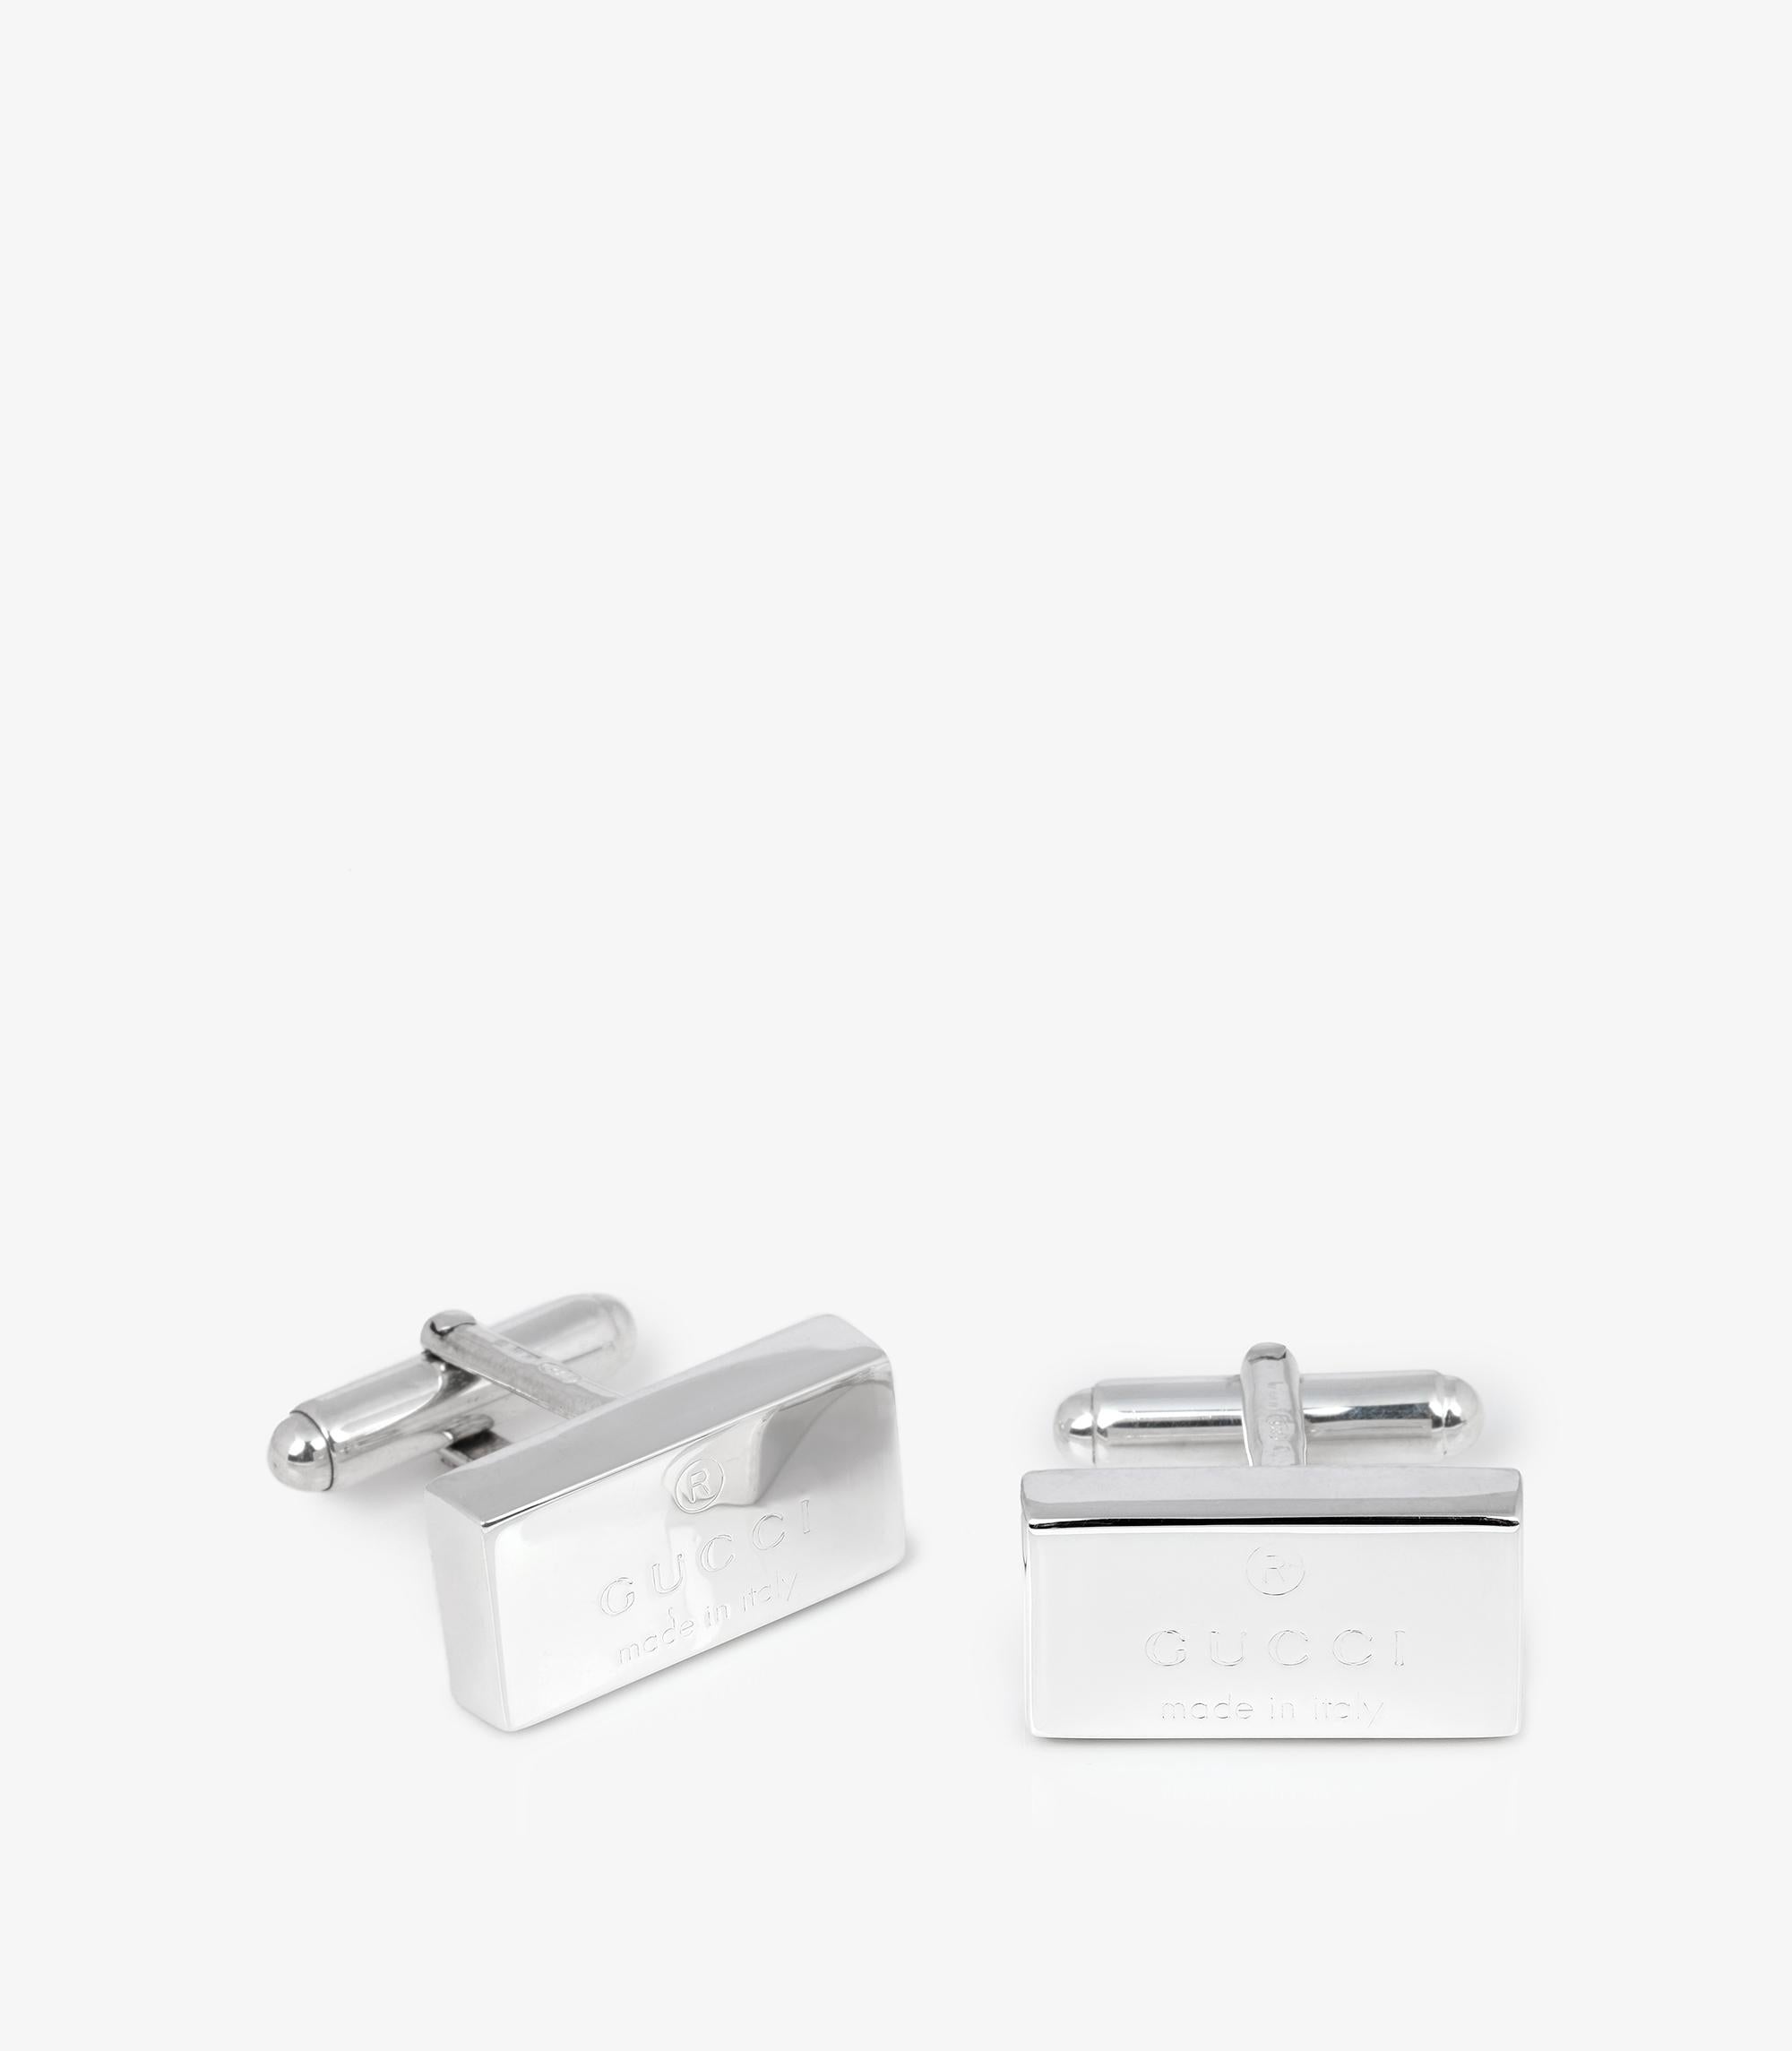 Gucci Sterling Silver Signature Cufflinks

Brand- Gucci
Model- Signature Cufflinks
Product Type- Cufflinks
Material(s)- Sterling Silver

Length- 2cm
Width- 1cm
Total Weight- 25.6g